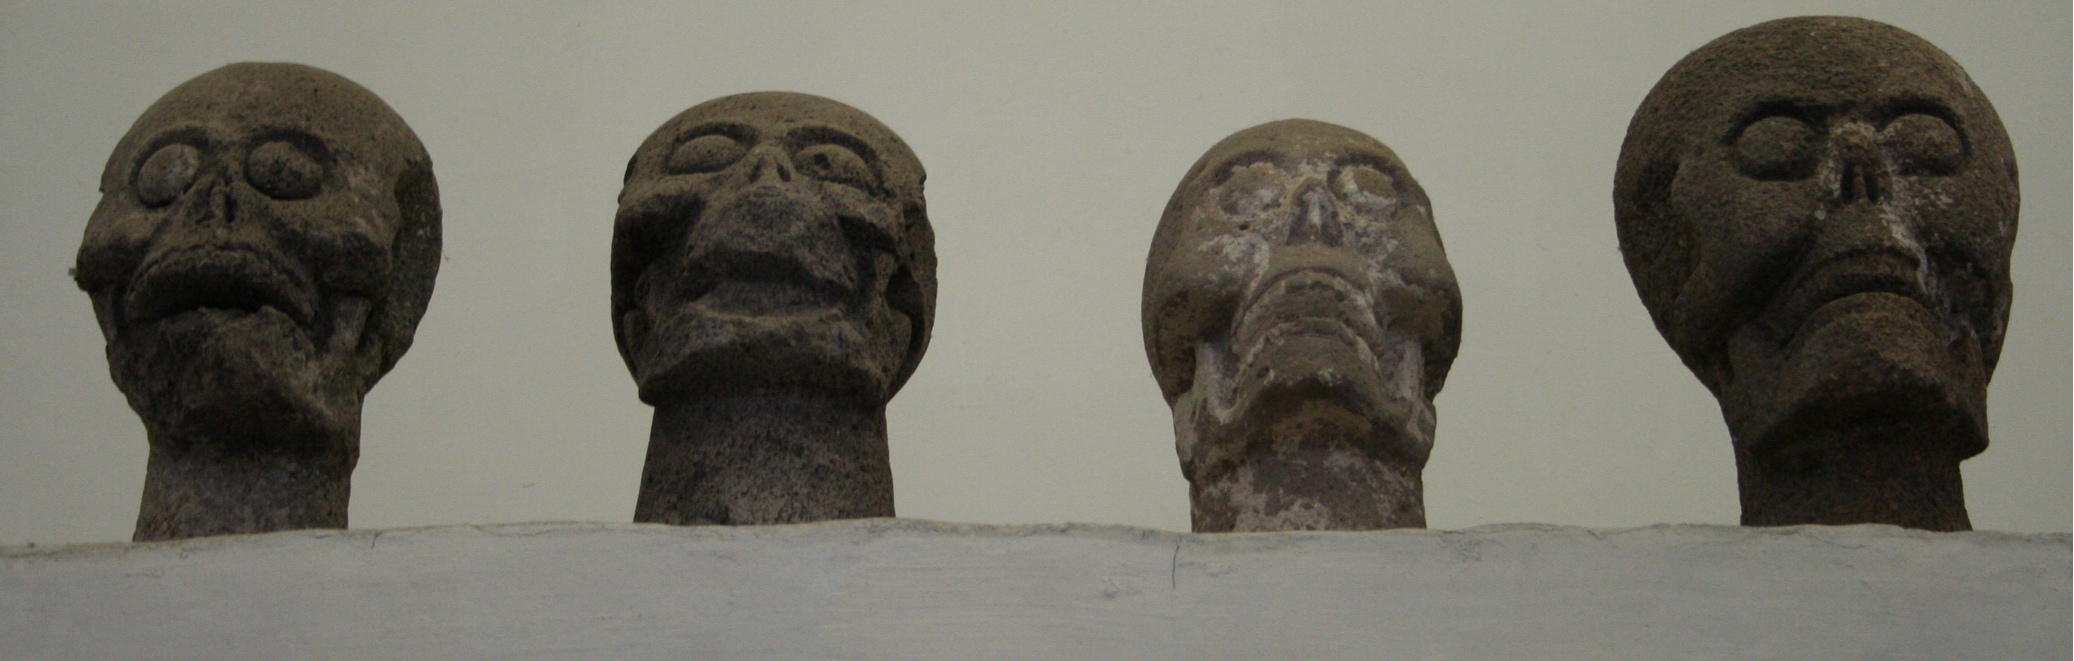 heads - found in Mexico